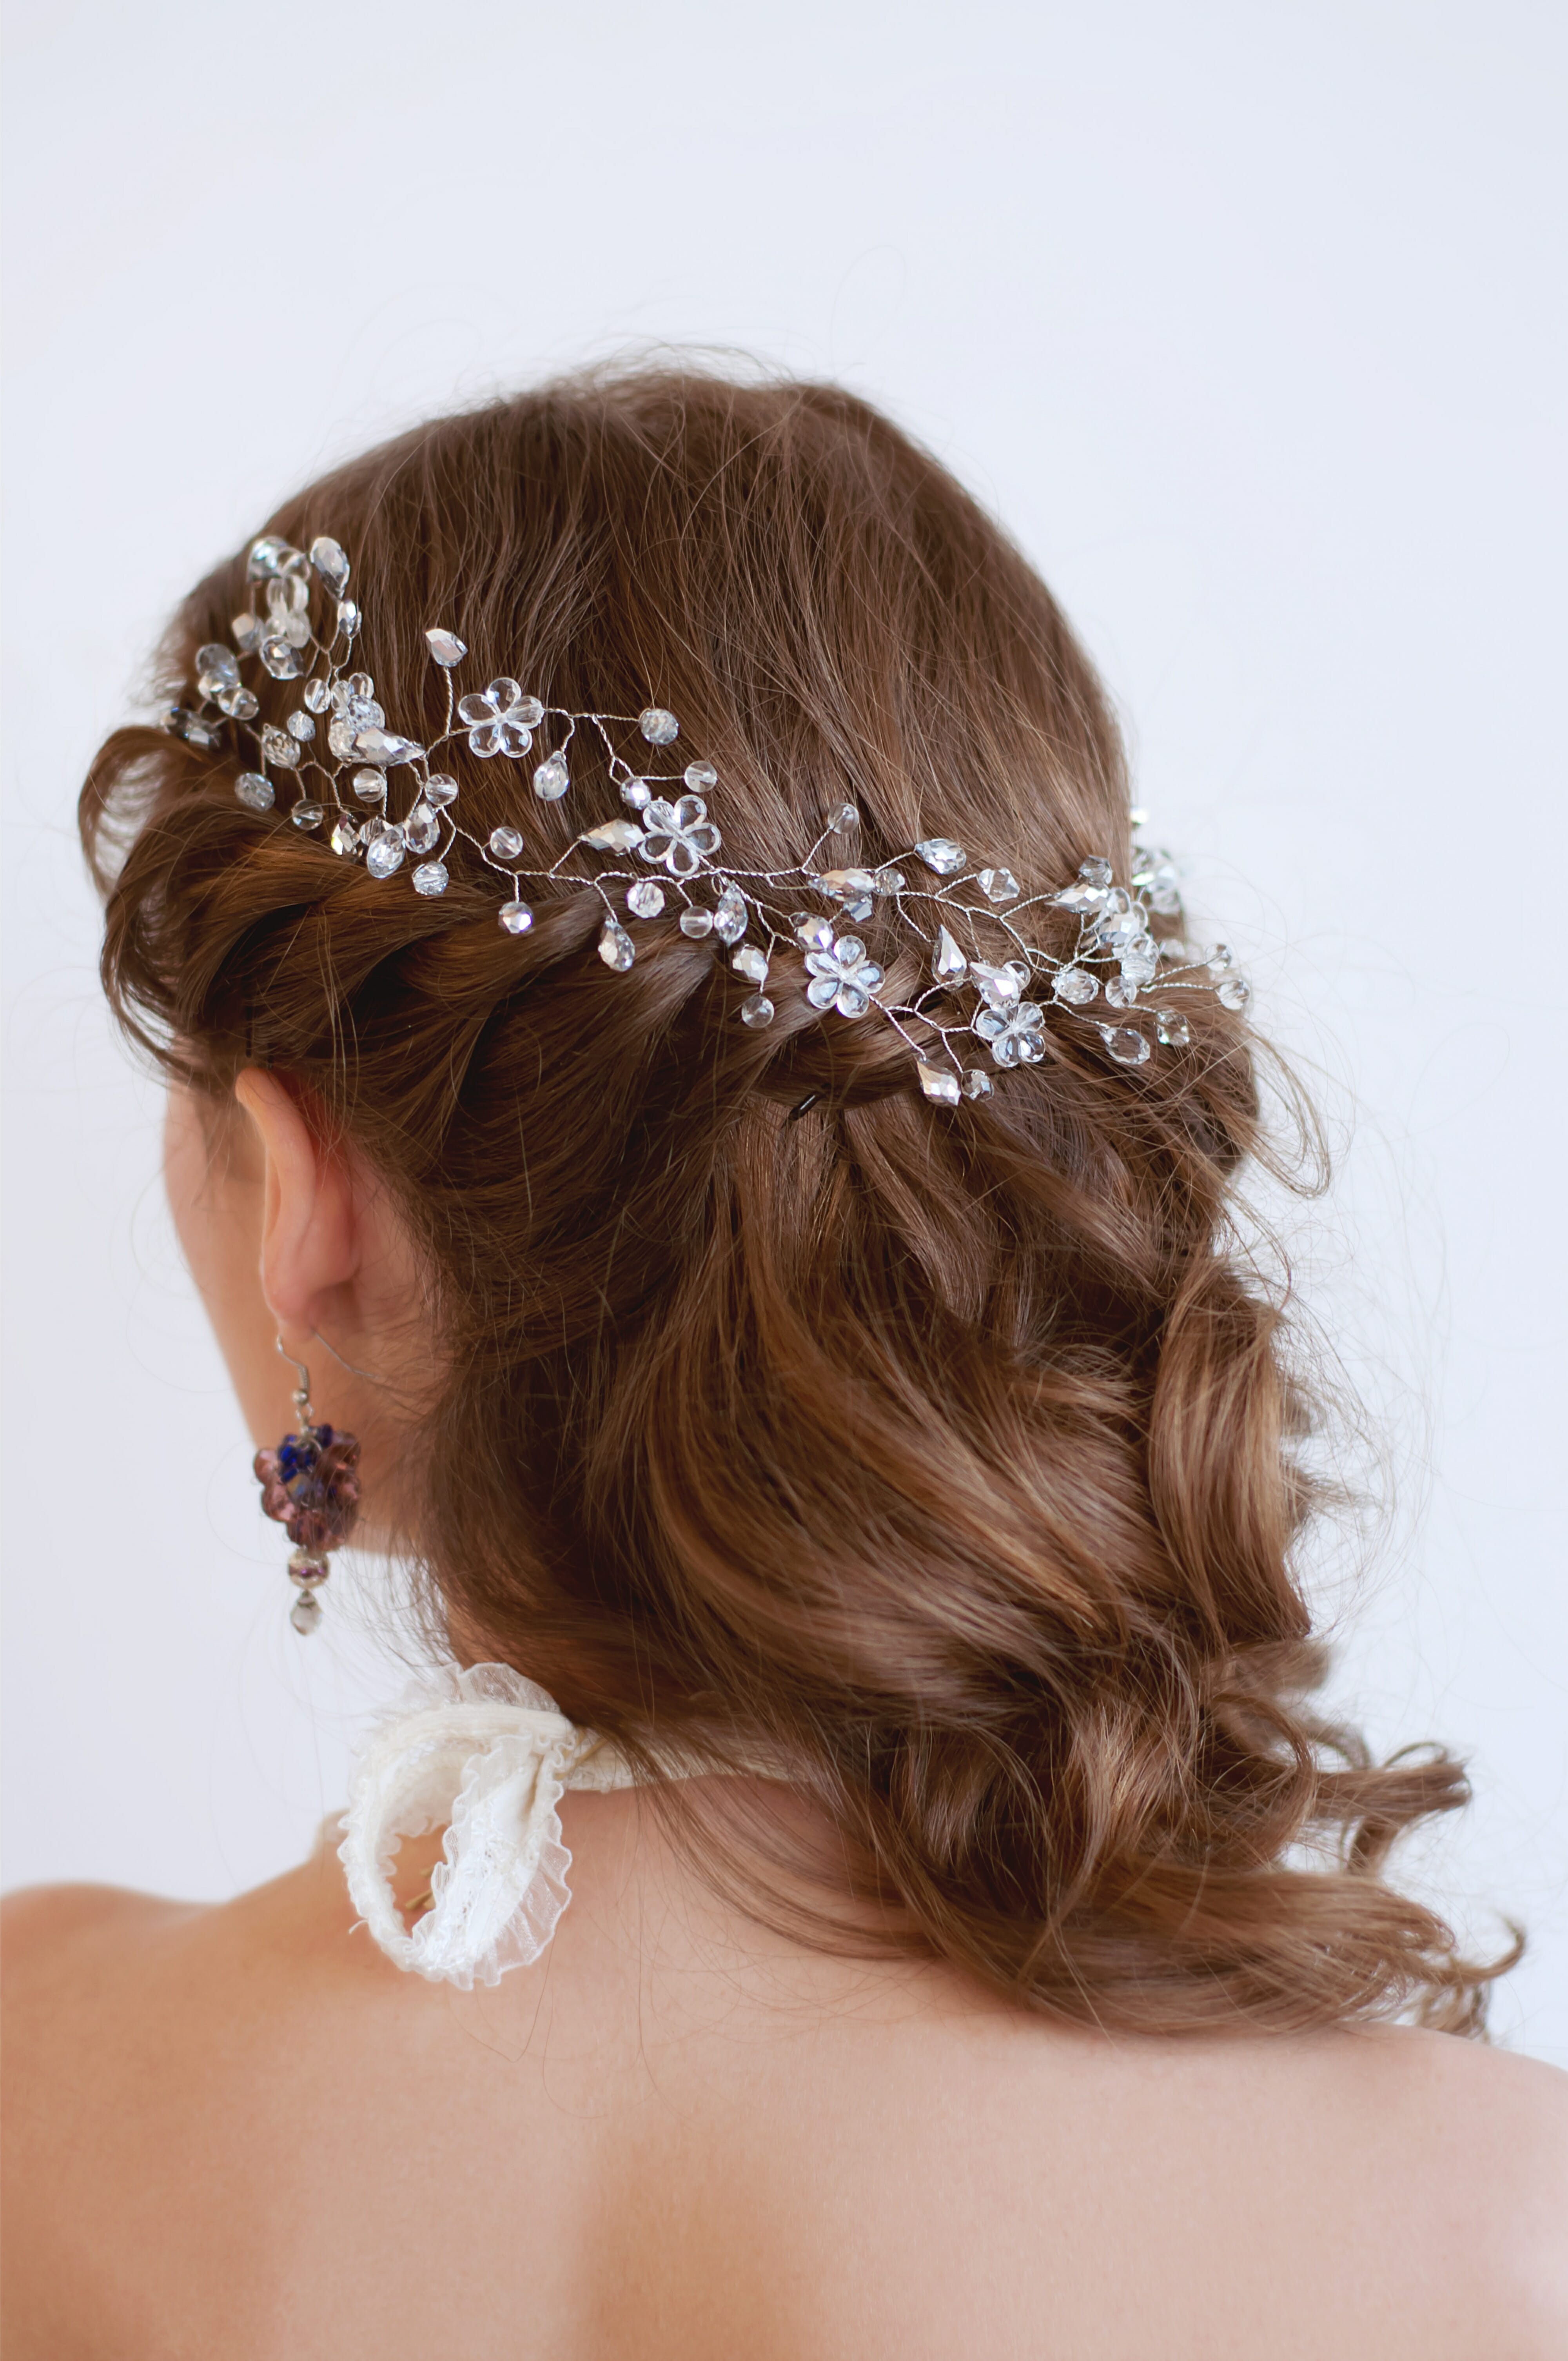 Bridal hairstyle with beaded crystal headpiece